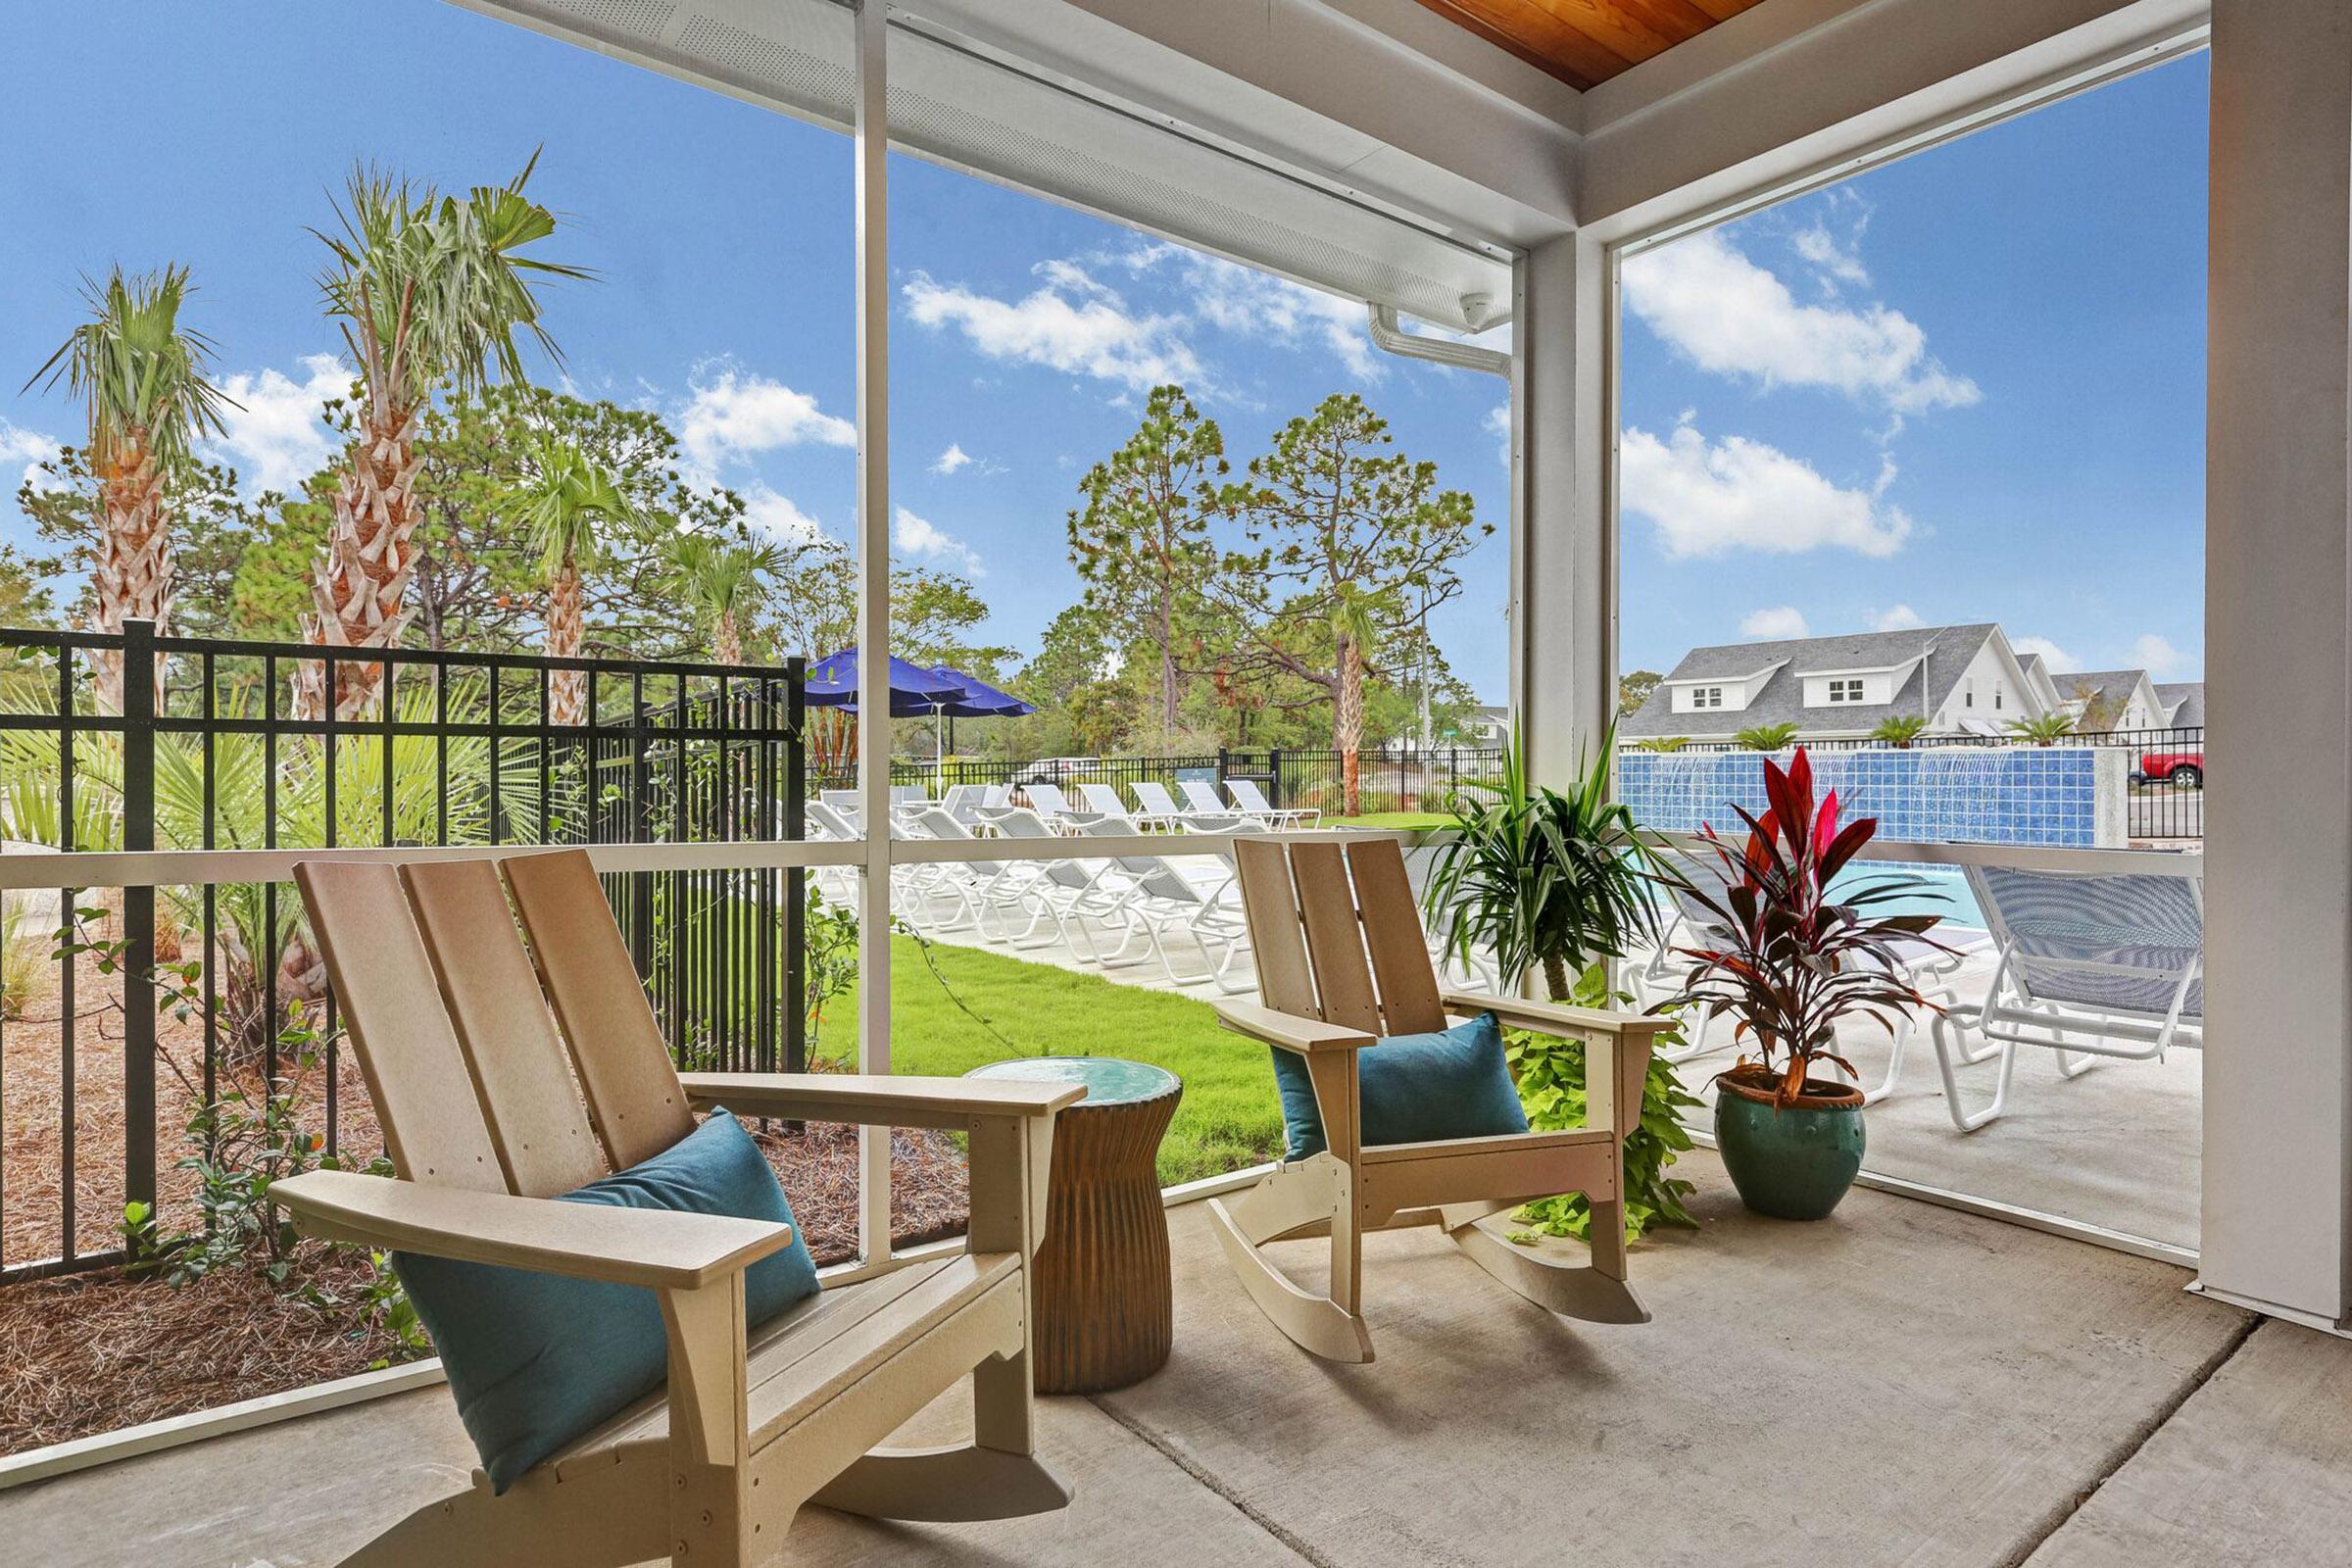 Relax outdoors at The Townhomes at Beau Rivage in Wilmington, North Carolina.